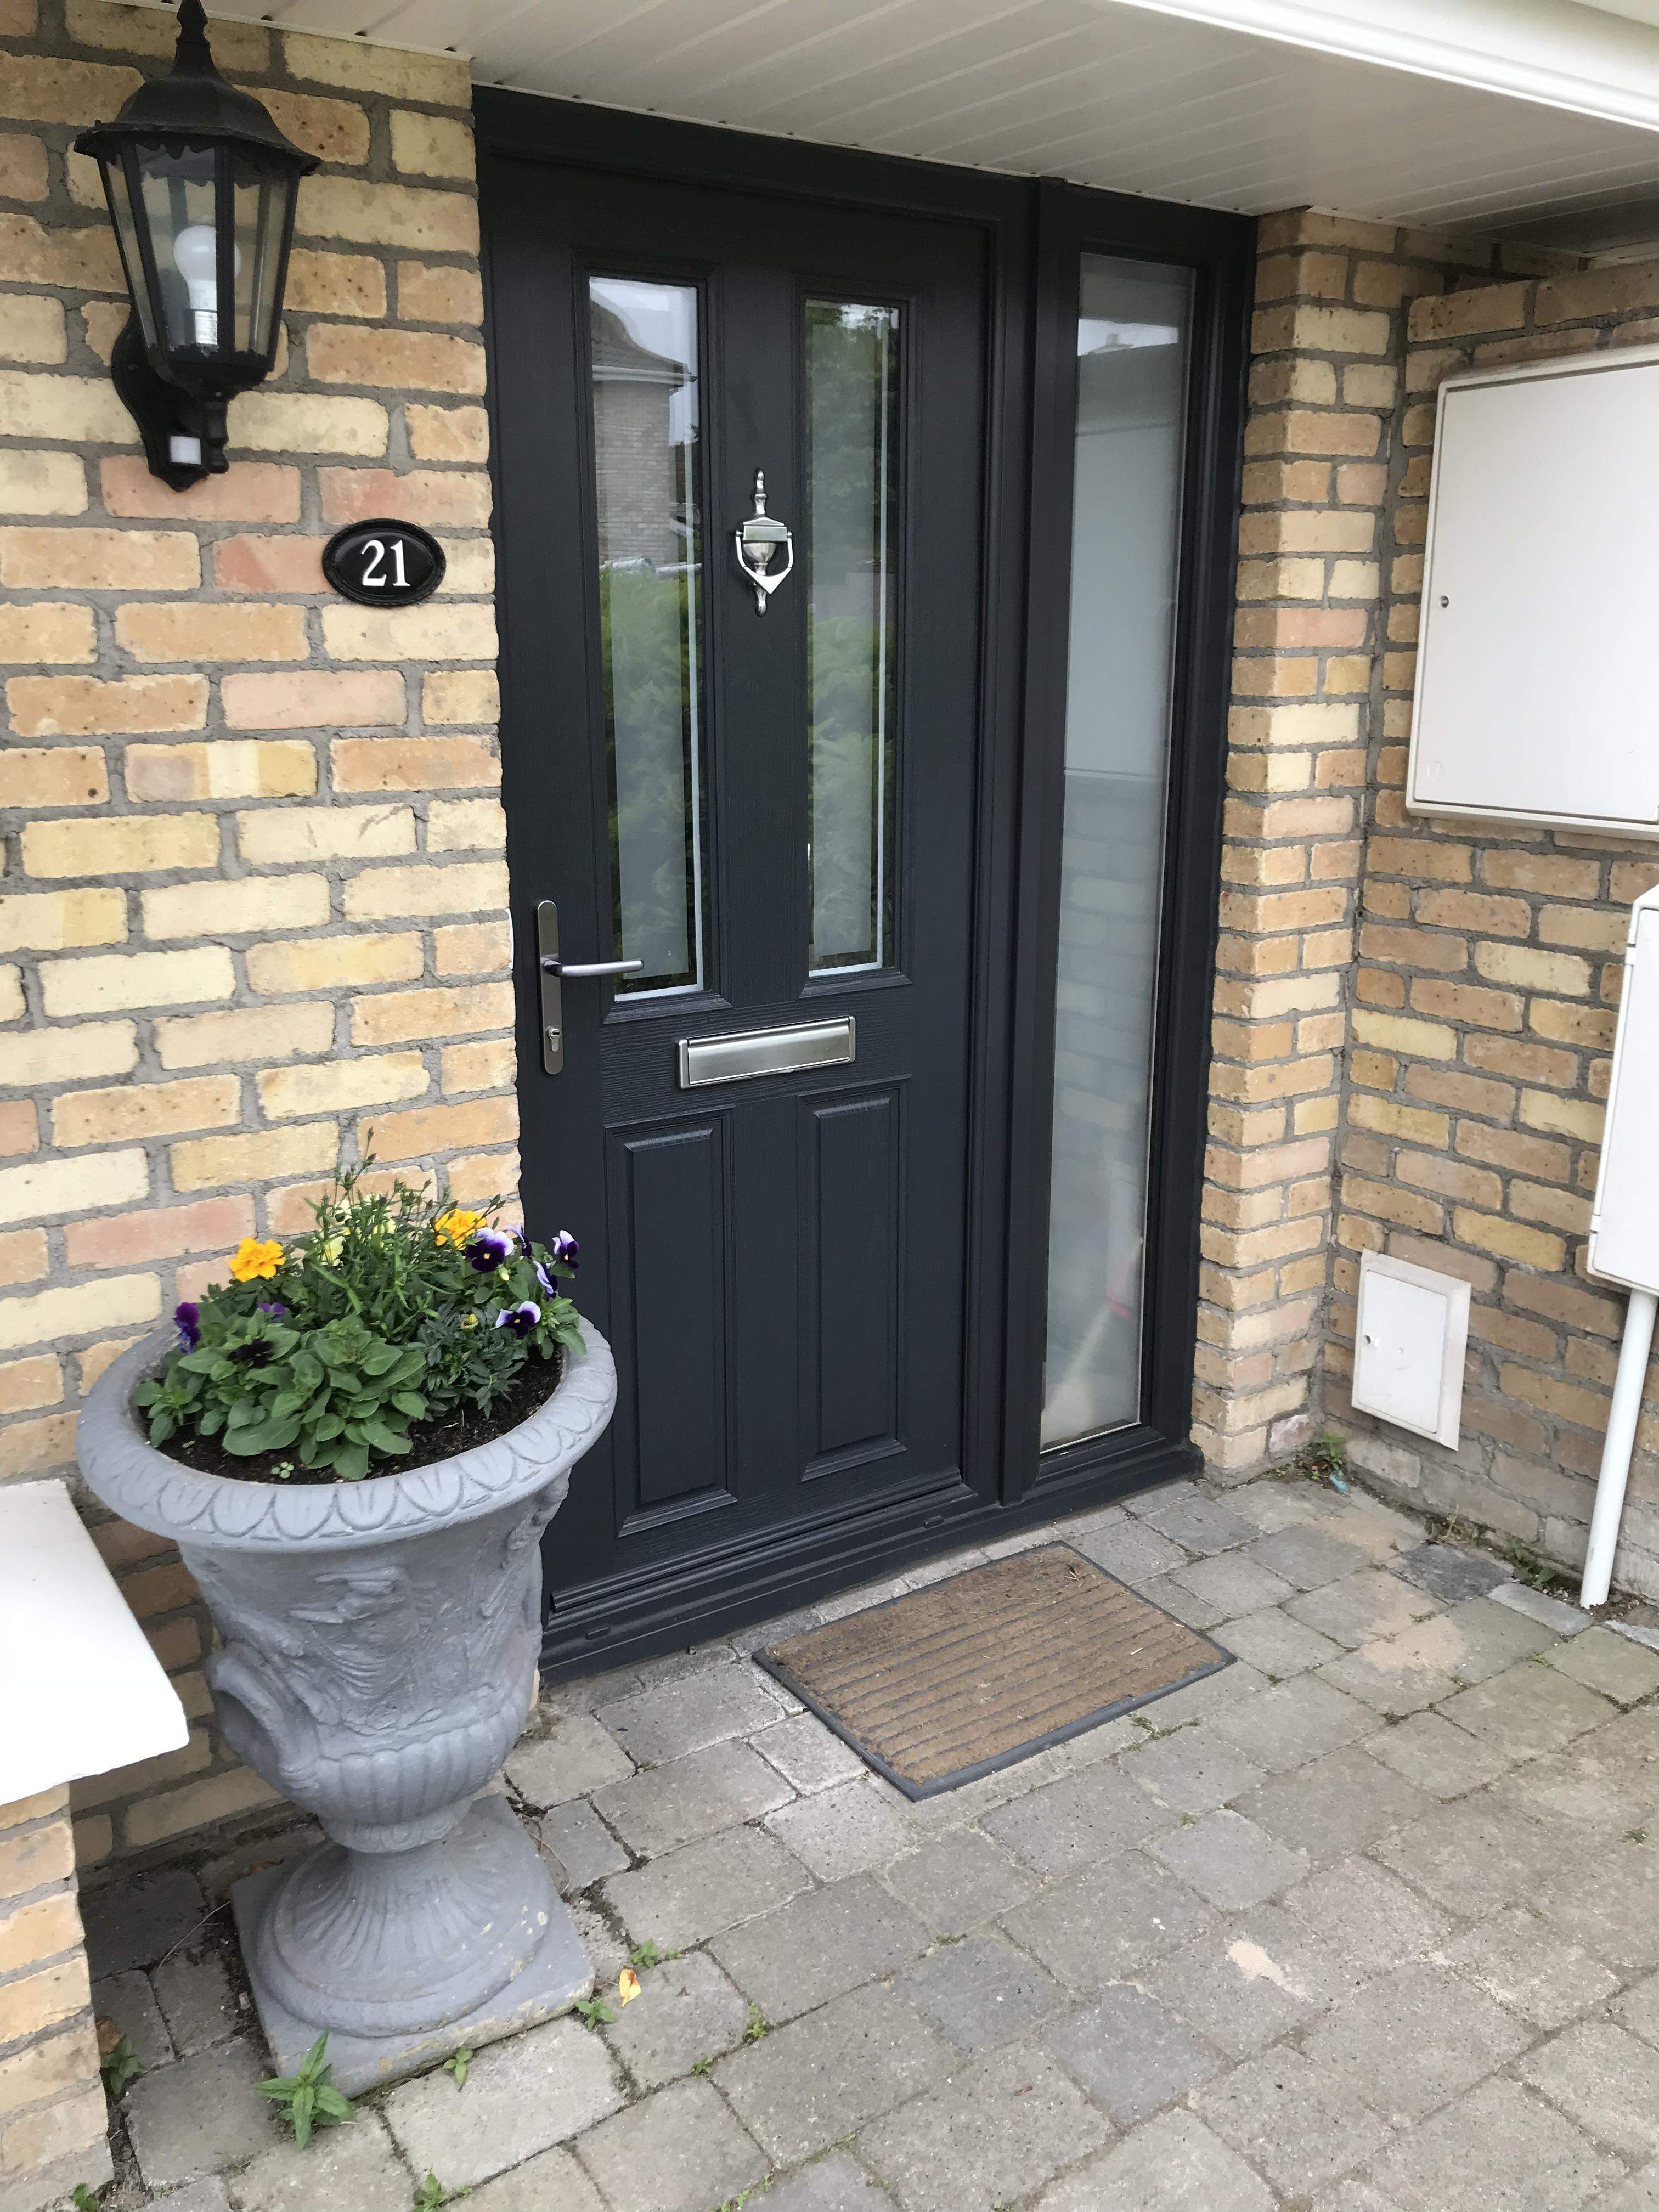 ANTHRACITE GREY APEER APM2 FITTED BY ASGARD WINDOWS IN CO. DUBLIN